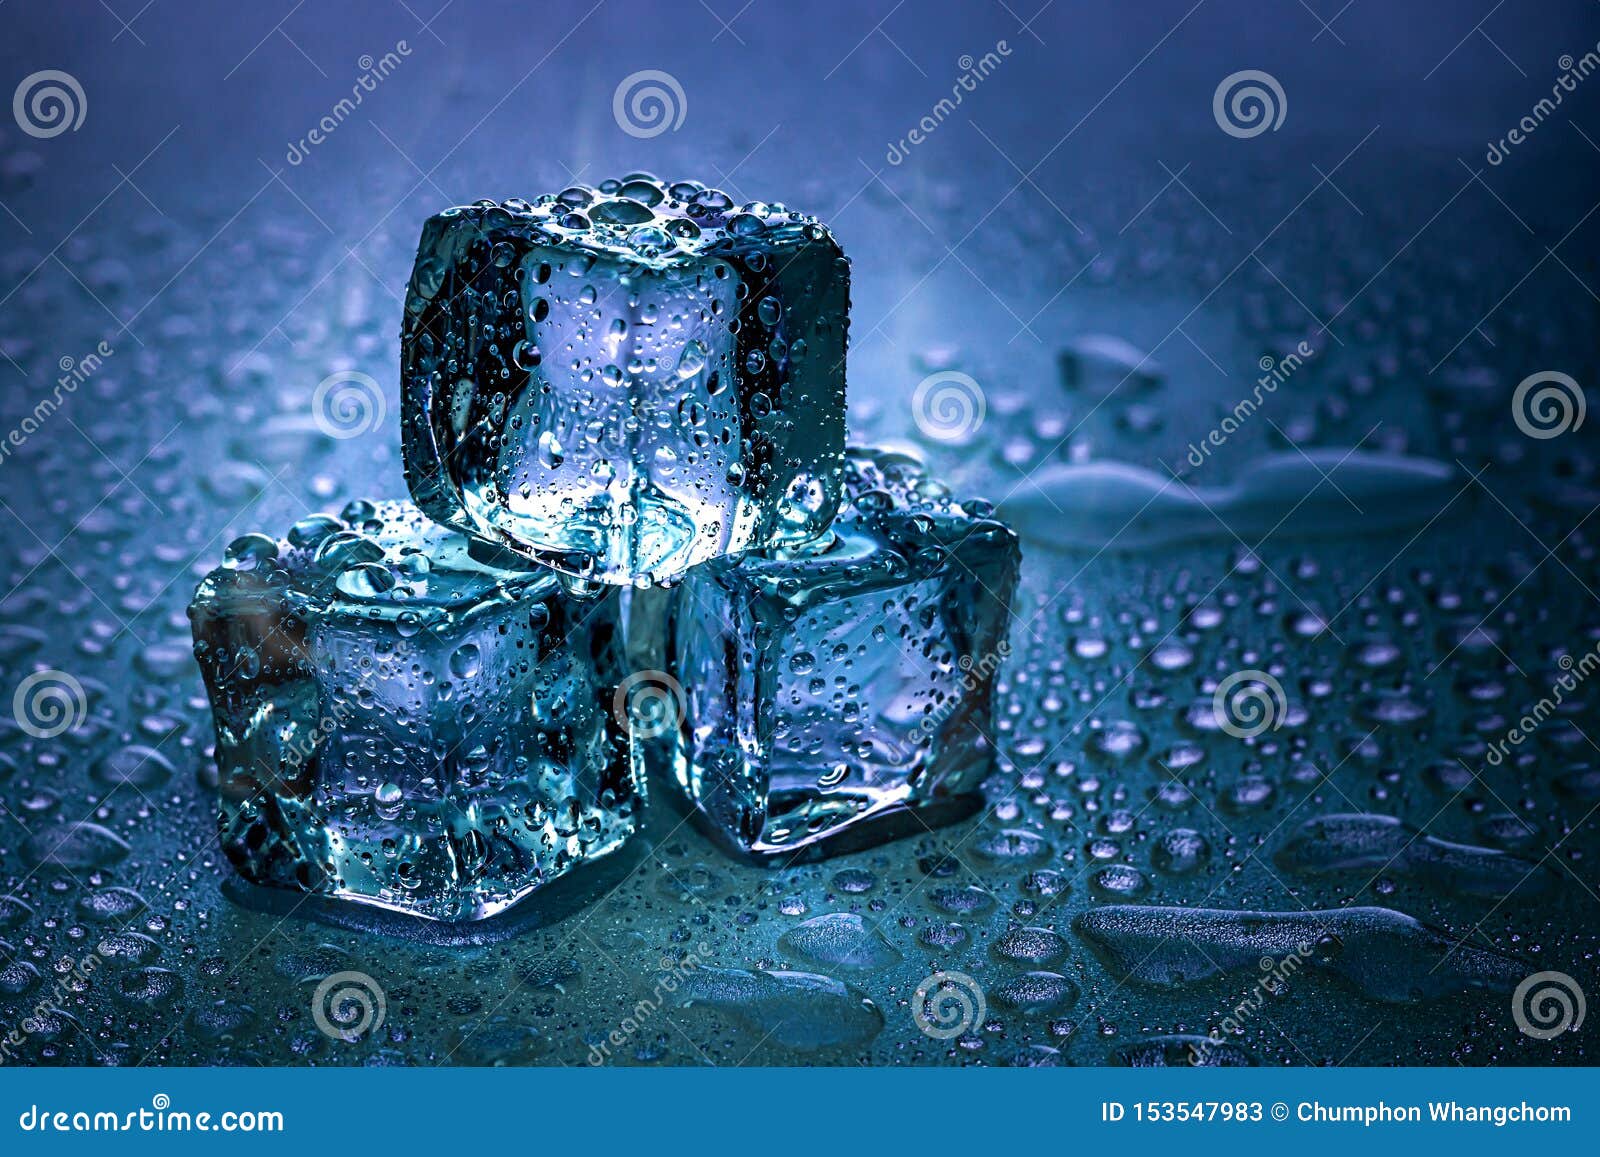 ice cubes and water melt on cool background. ice blocks with cold drinks or beverage